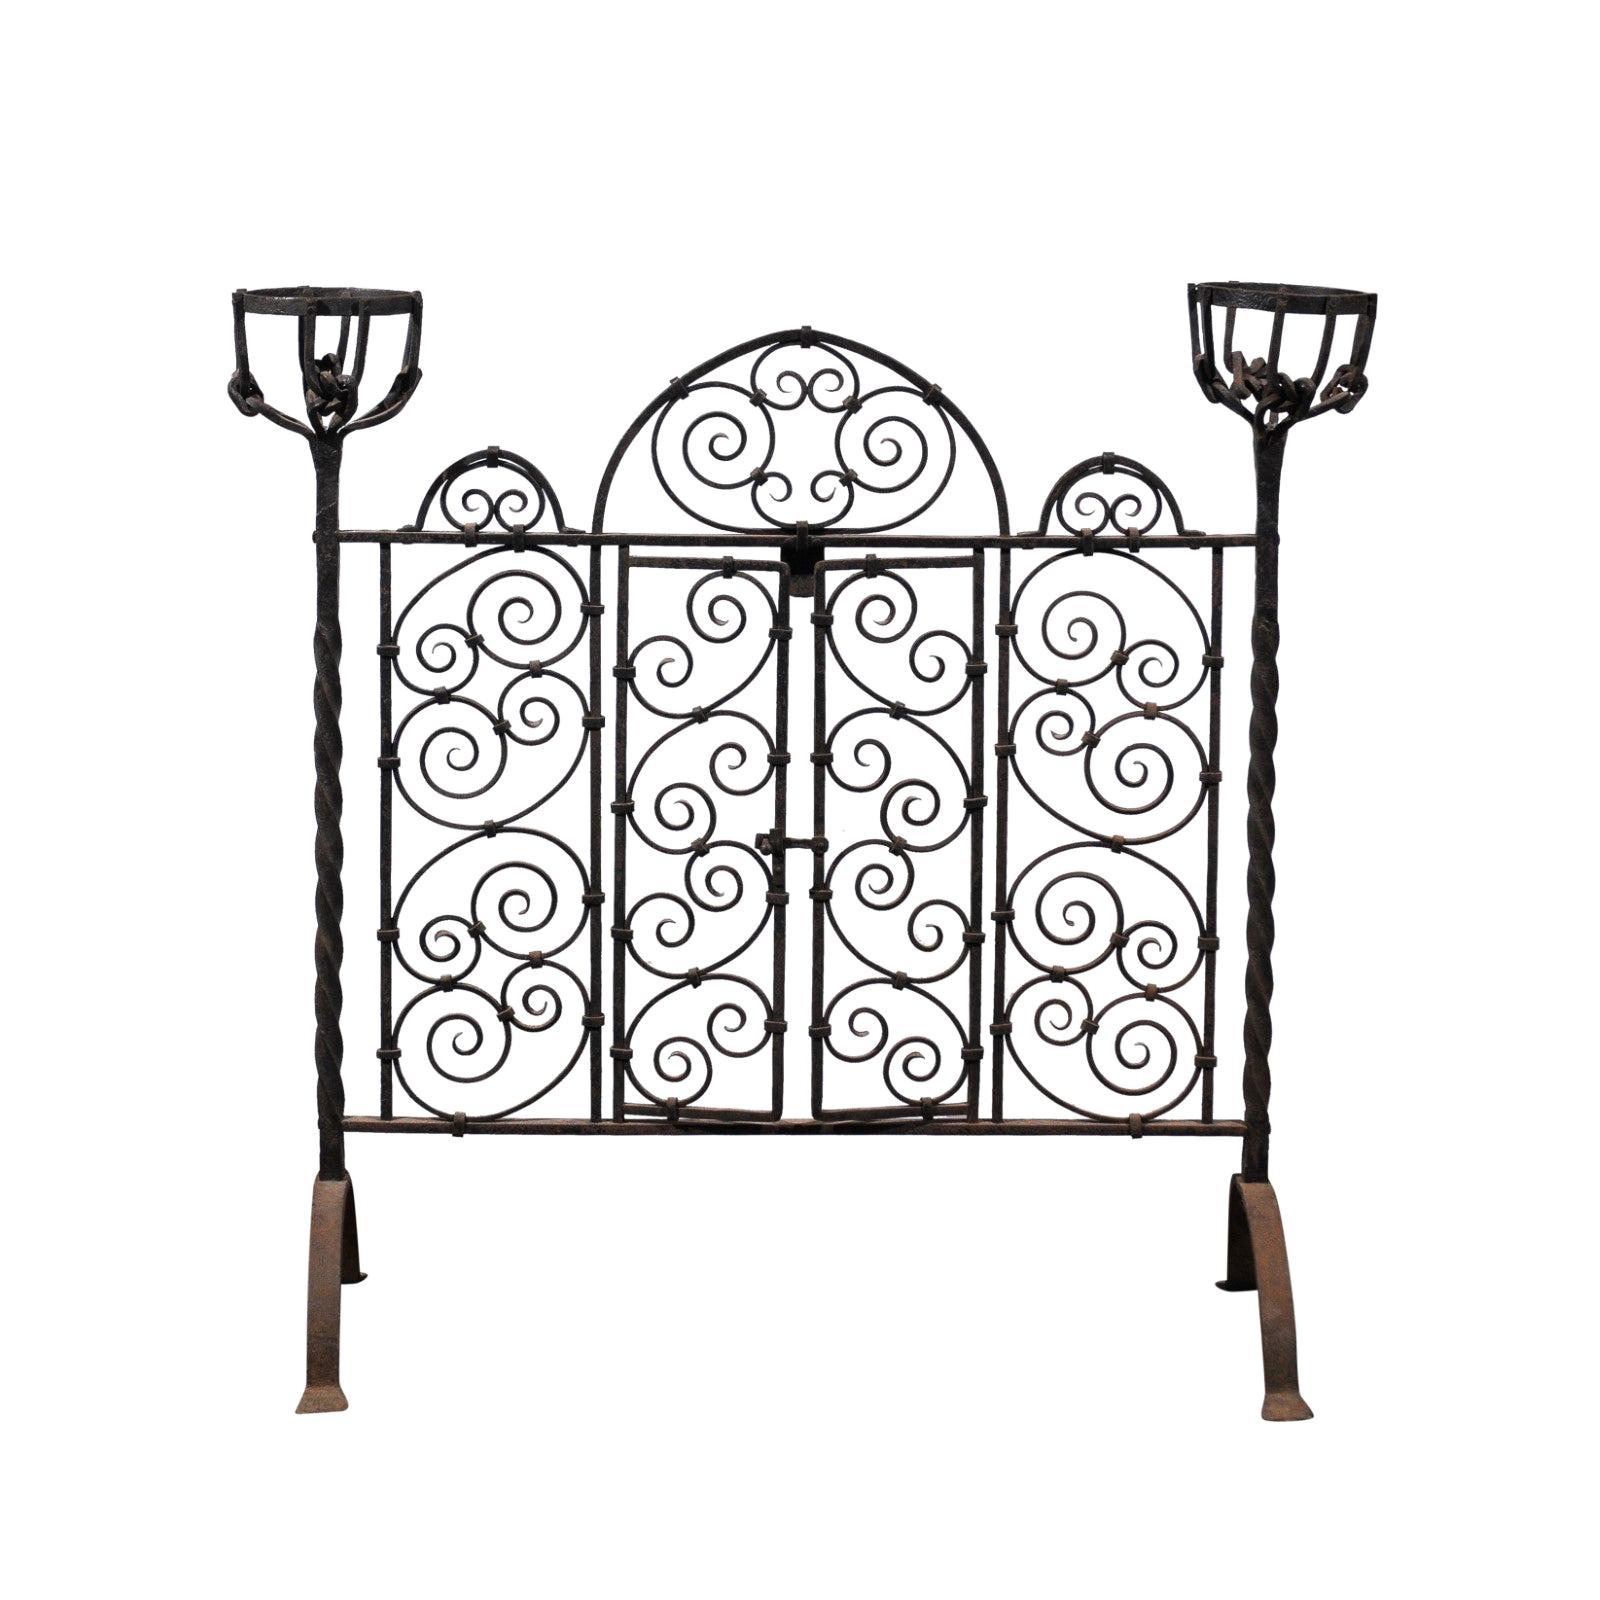 French Wrought Iron Freestanding Firescreen with Warming Holders, circa 1880